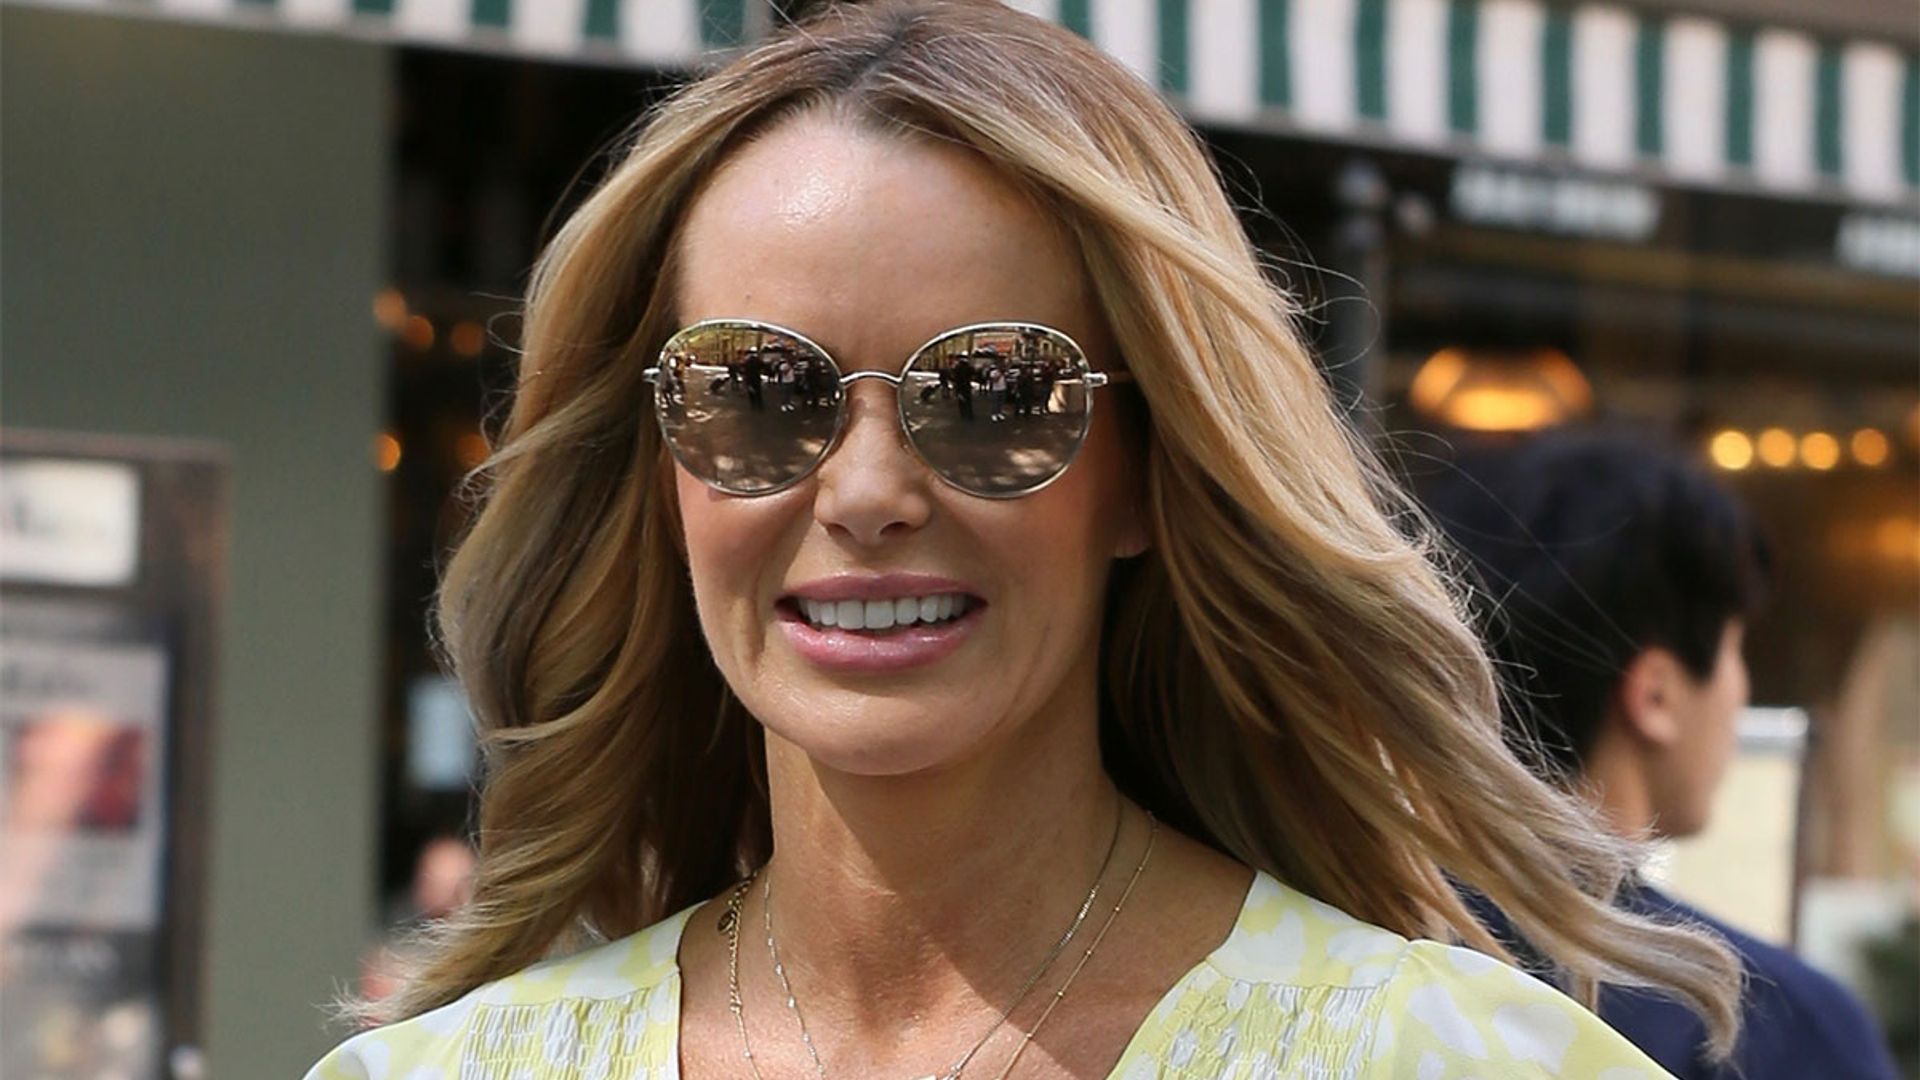 Amanda Holden just wowed her Instagram fans in sexy leather trousers